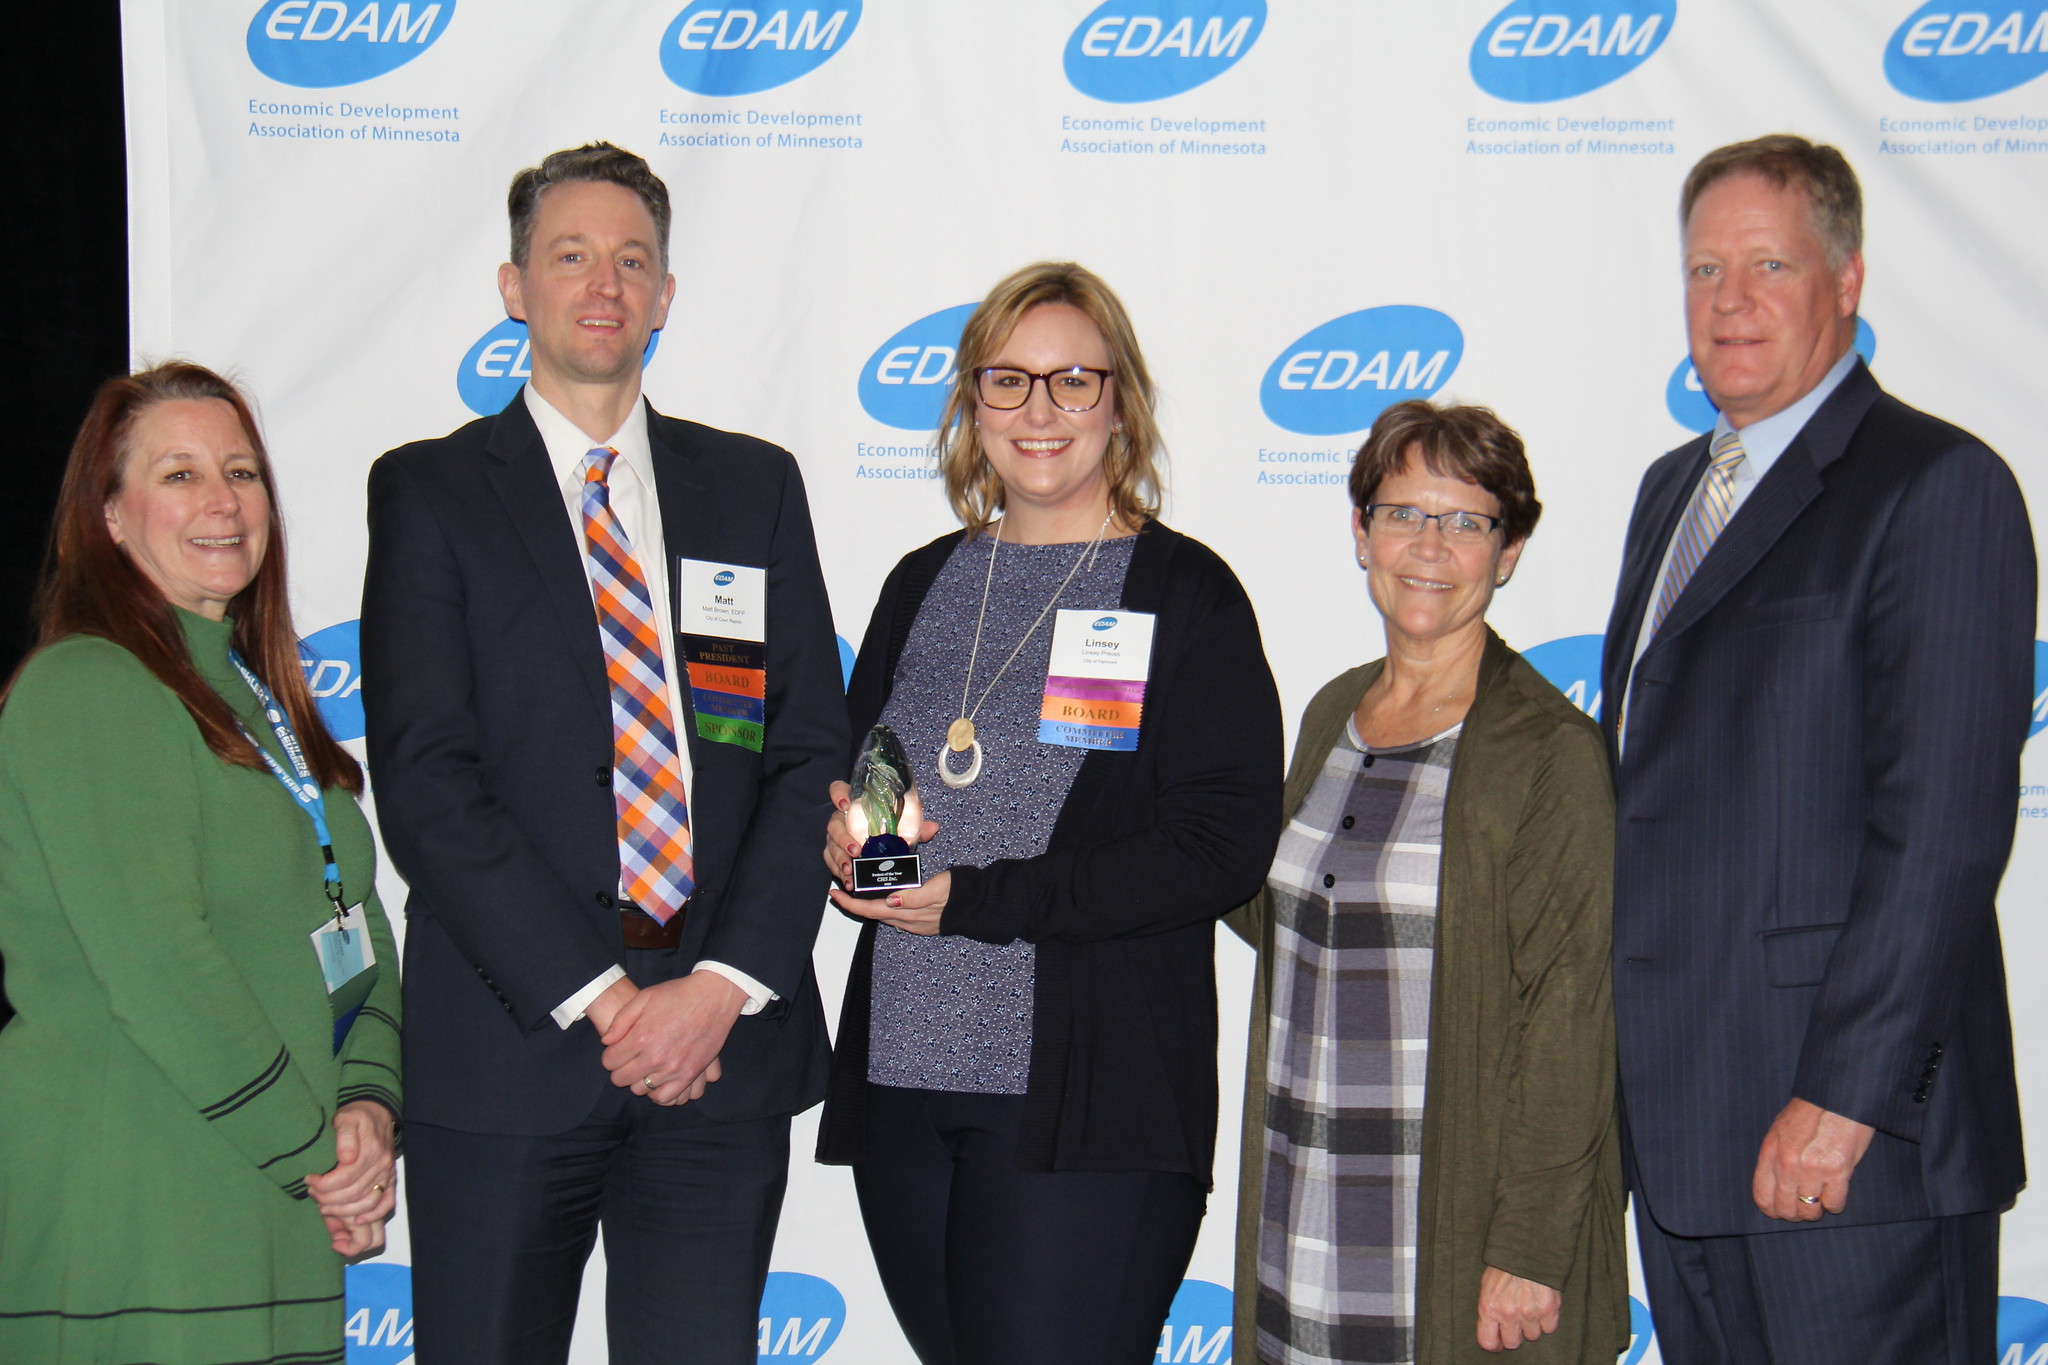 CHS Inc. in Fairmont, MN Wins Project of the Year at the 2020 Economic Development Association of Minnesota Conference Photo